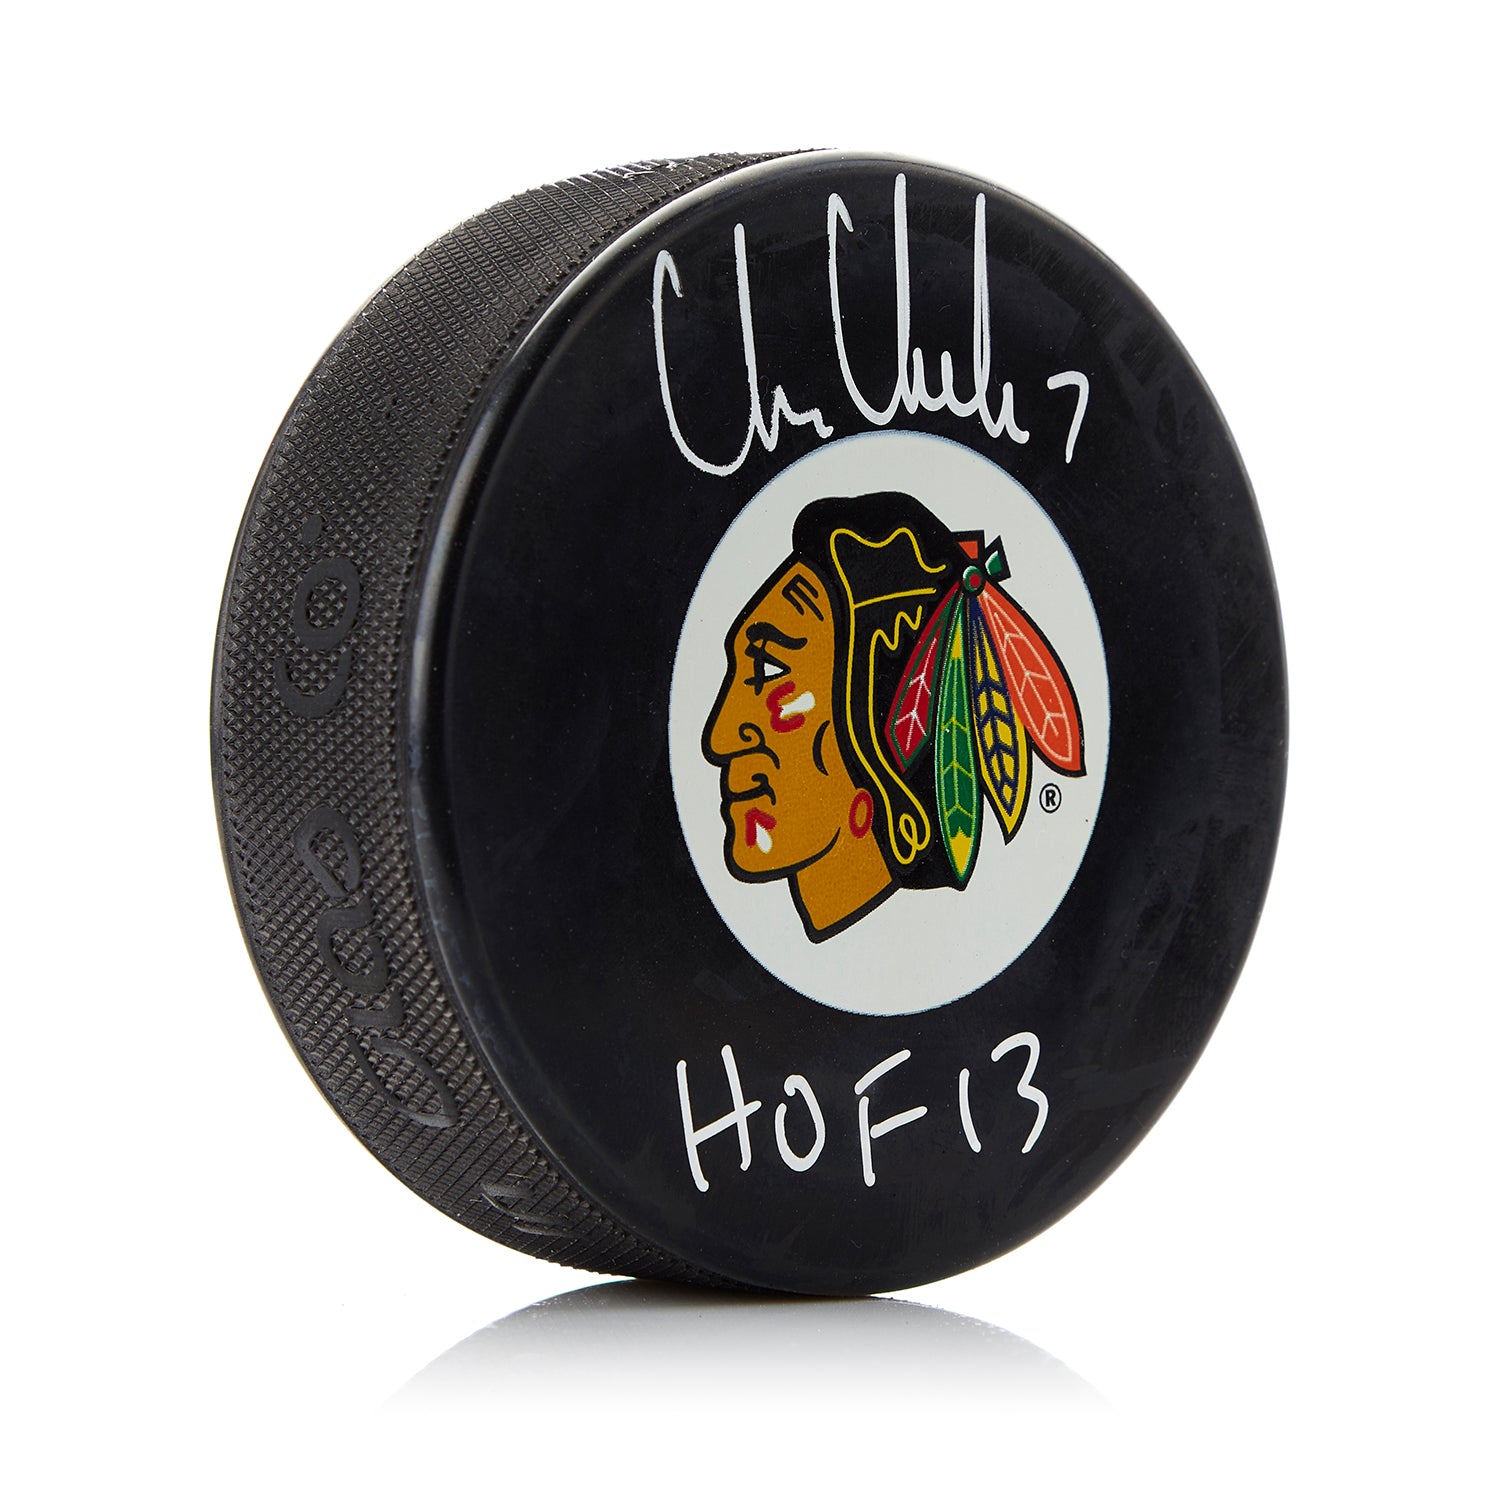 Chris Chelios Chicago Blackhawks Autographed Hockey Puck with HOF Note